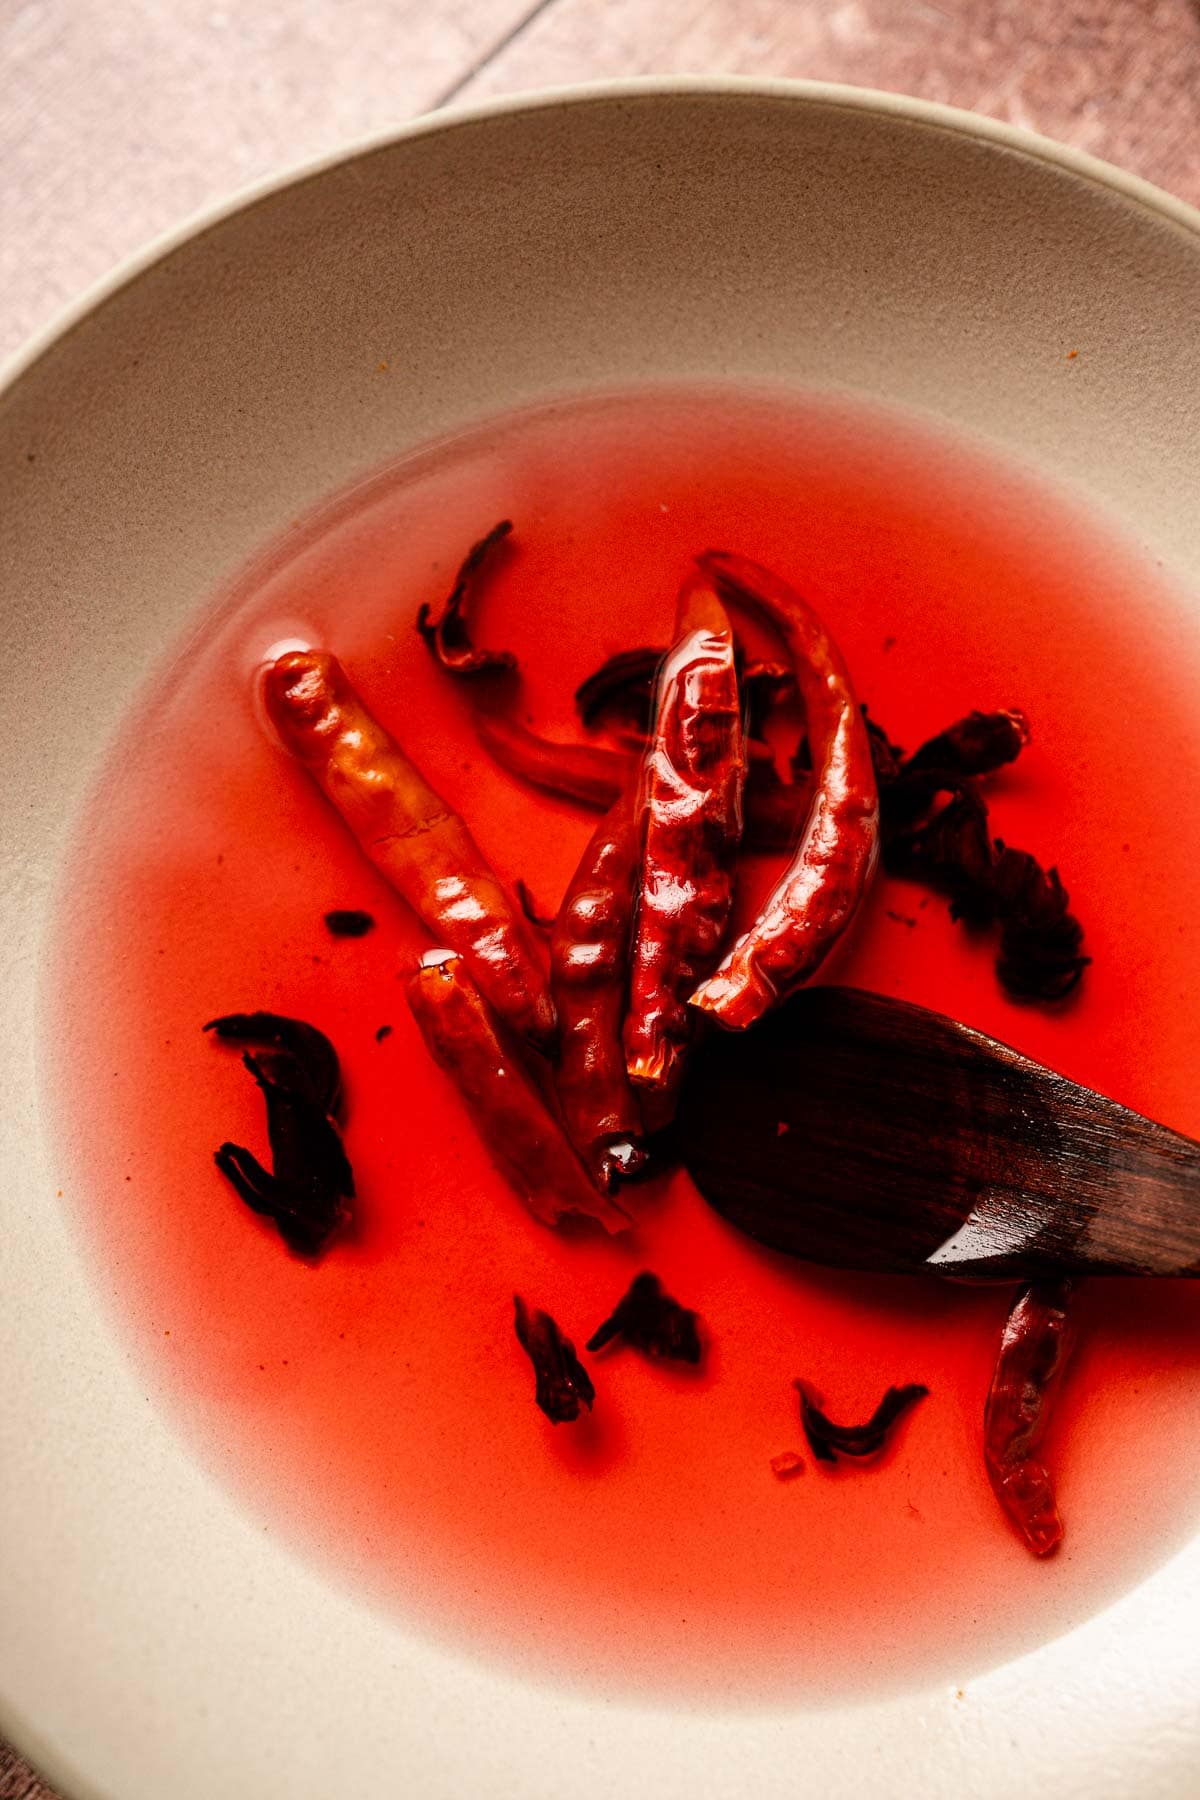 Dried chiles and hibiscus flowers coloring water red in a ceramic bowl.